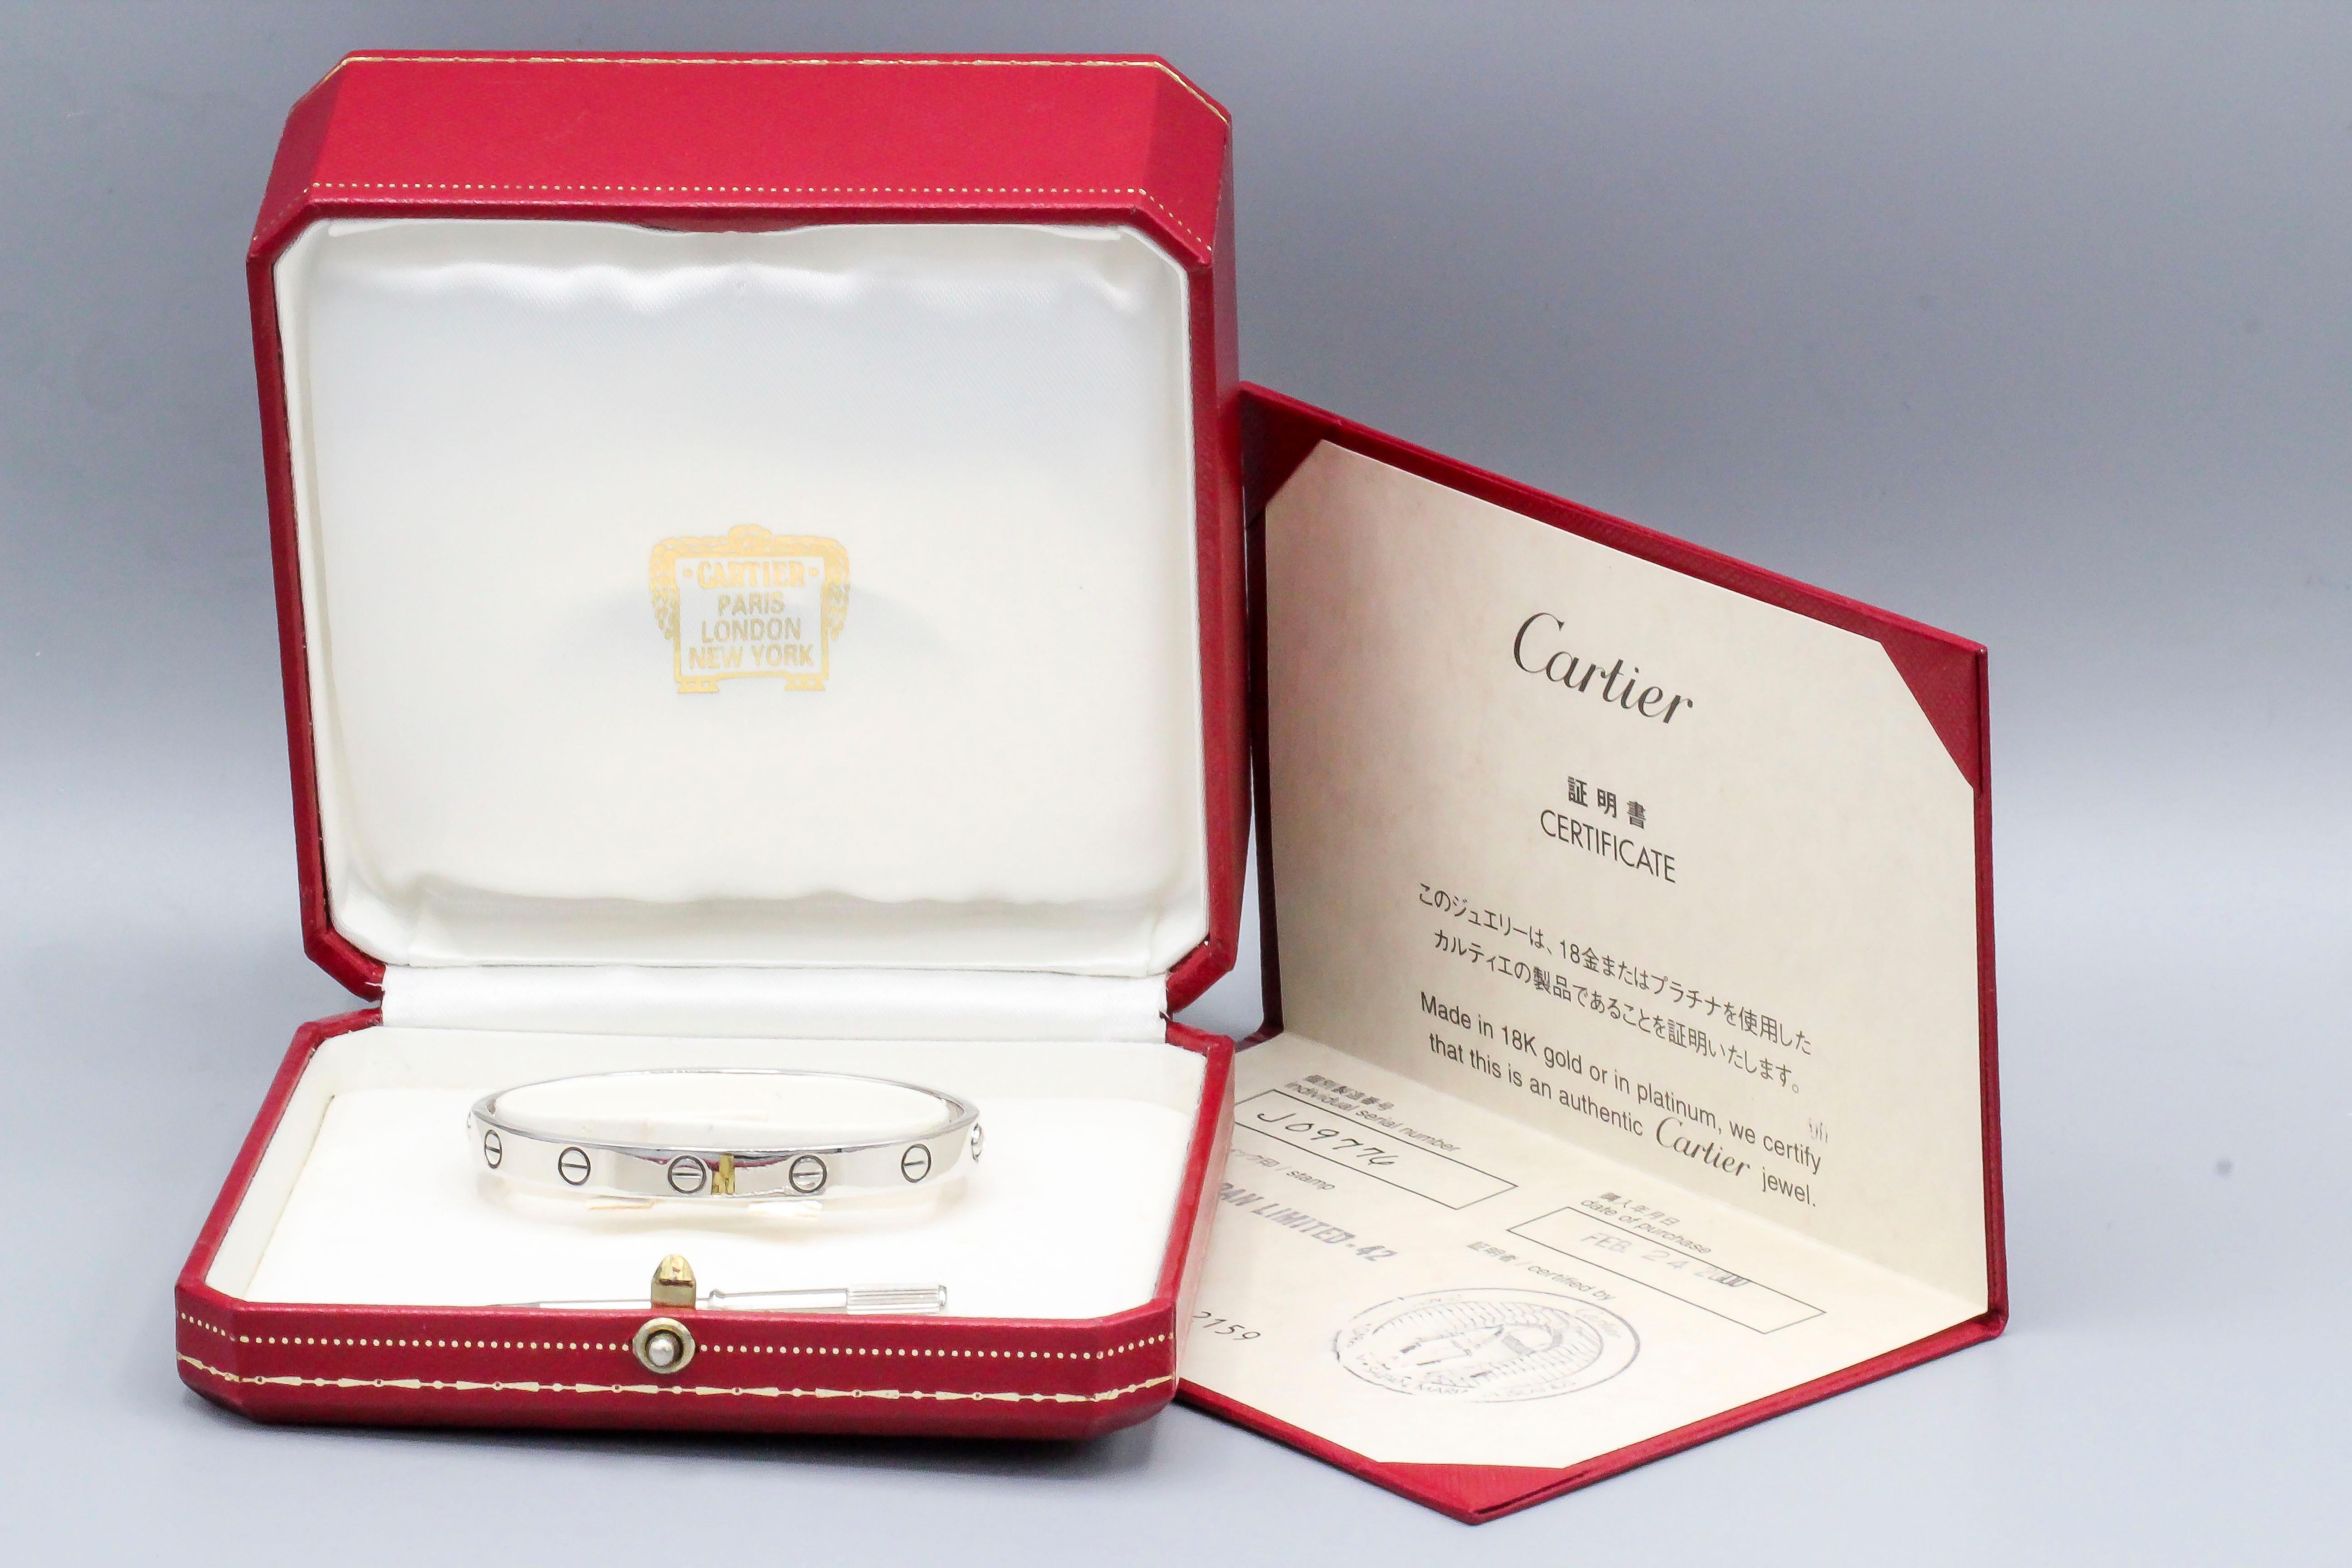 Classic 18k white gold Cartier Love bracelet.  It is a size 16, comes with the screwdriver and box, as well as papers.  Current retail $6750

Hallmarks: Cartier 1993, 750, reference numbers, 16